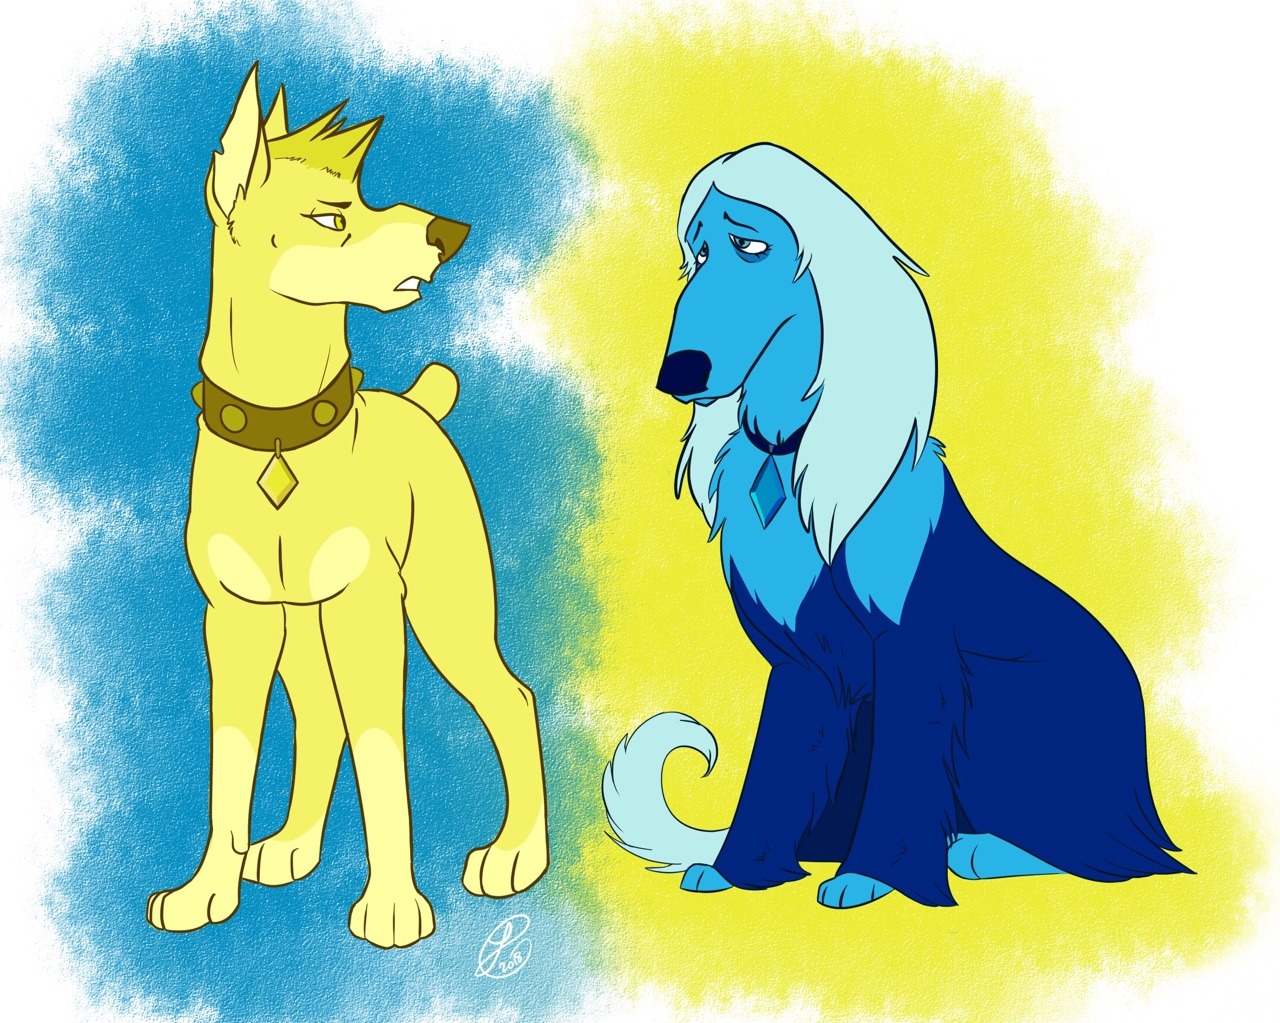 HEY. HEY YOU GUYS LOOK. THE FIRST PIECE OF DIGITAL ART I’VE DRAWN IN OVER A YEAR AND ITS SU RELATED. I reeeeeally love @nekonotaishou’s Bleach AU where the characters are dogs and it inspired me to...